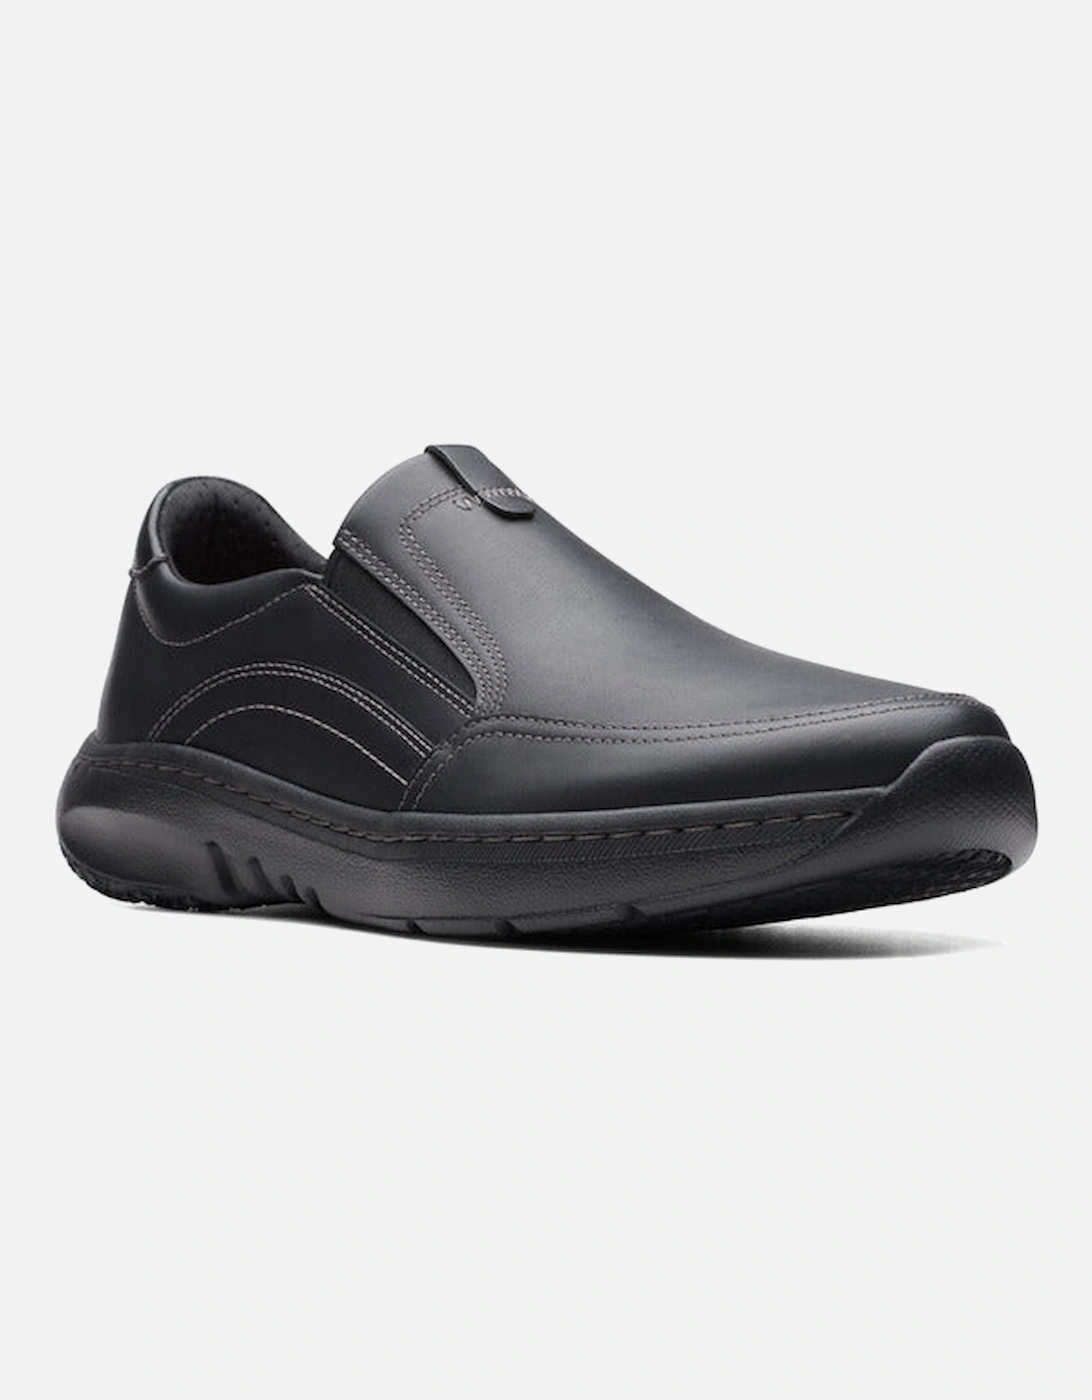 Mens slip on shoe Clarkspro Step in Black leather, 2 of 1